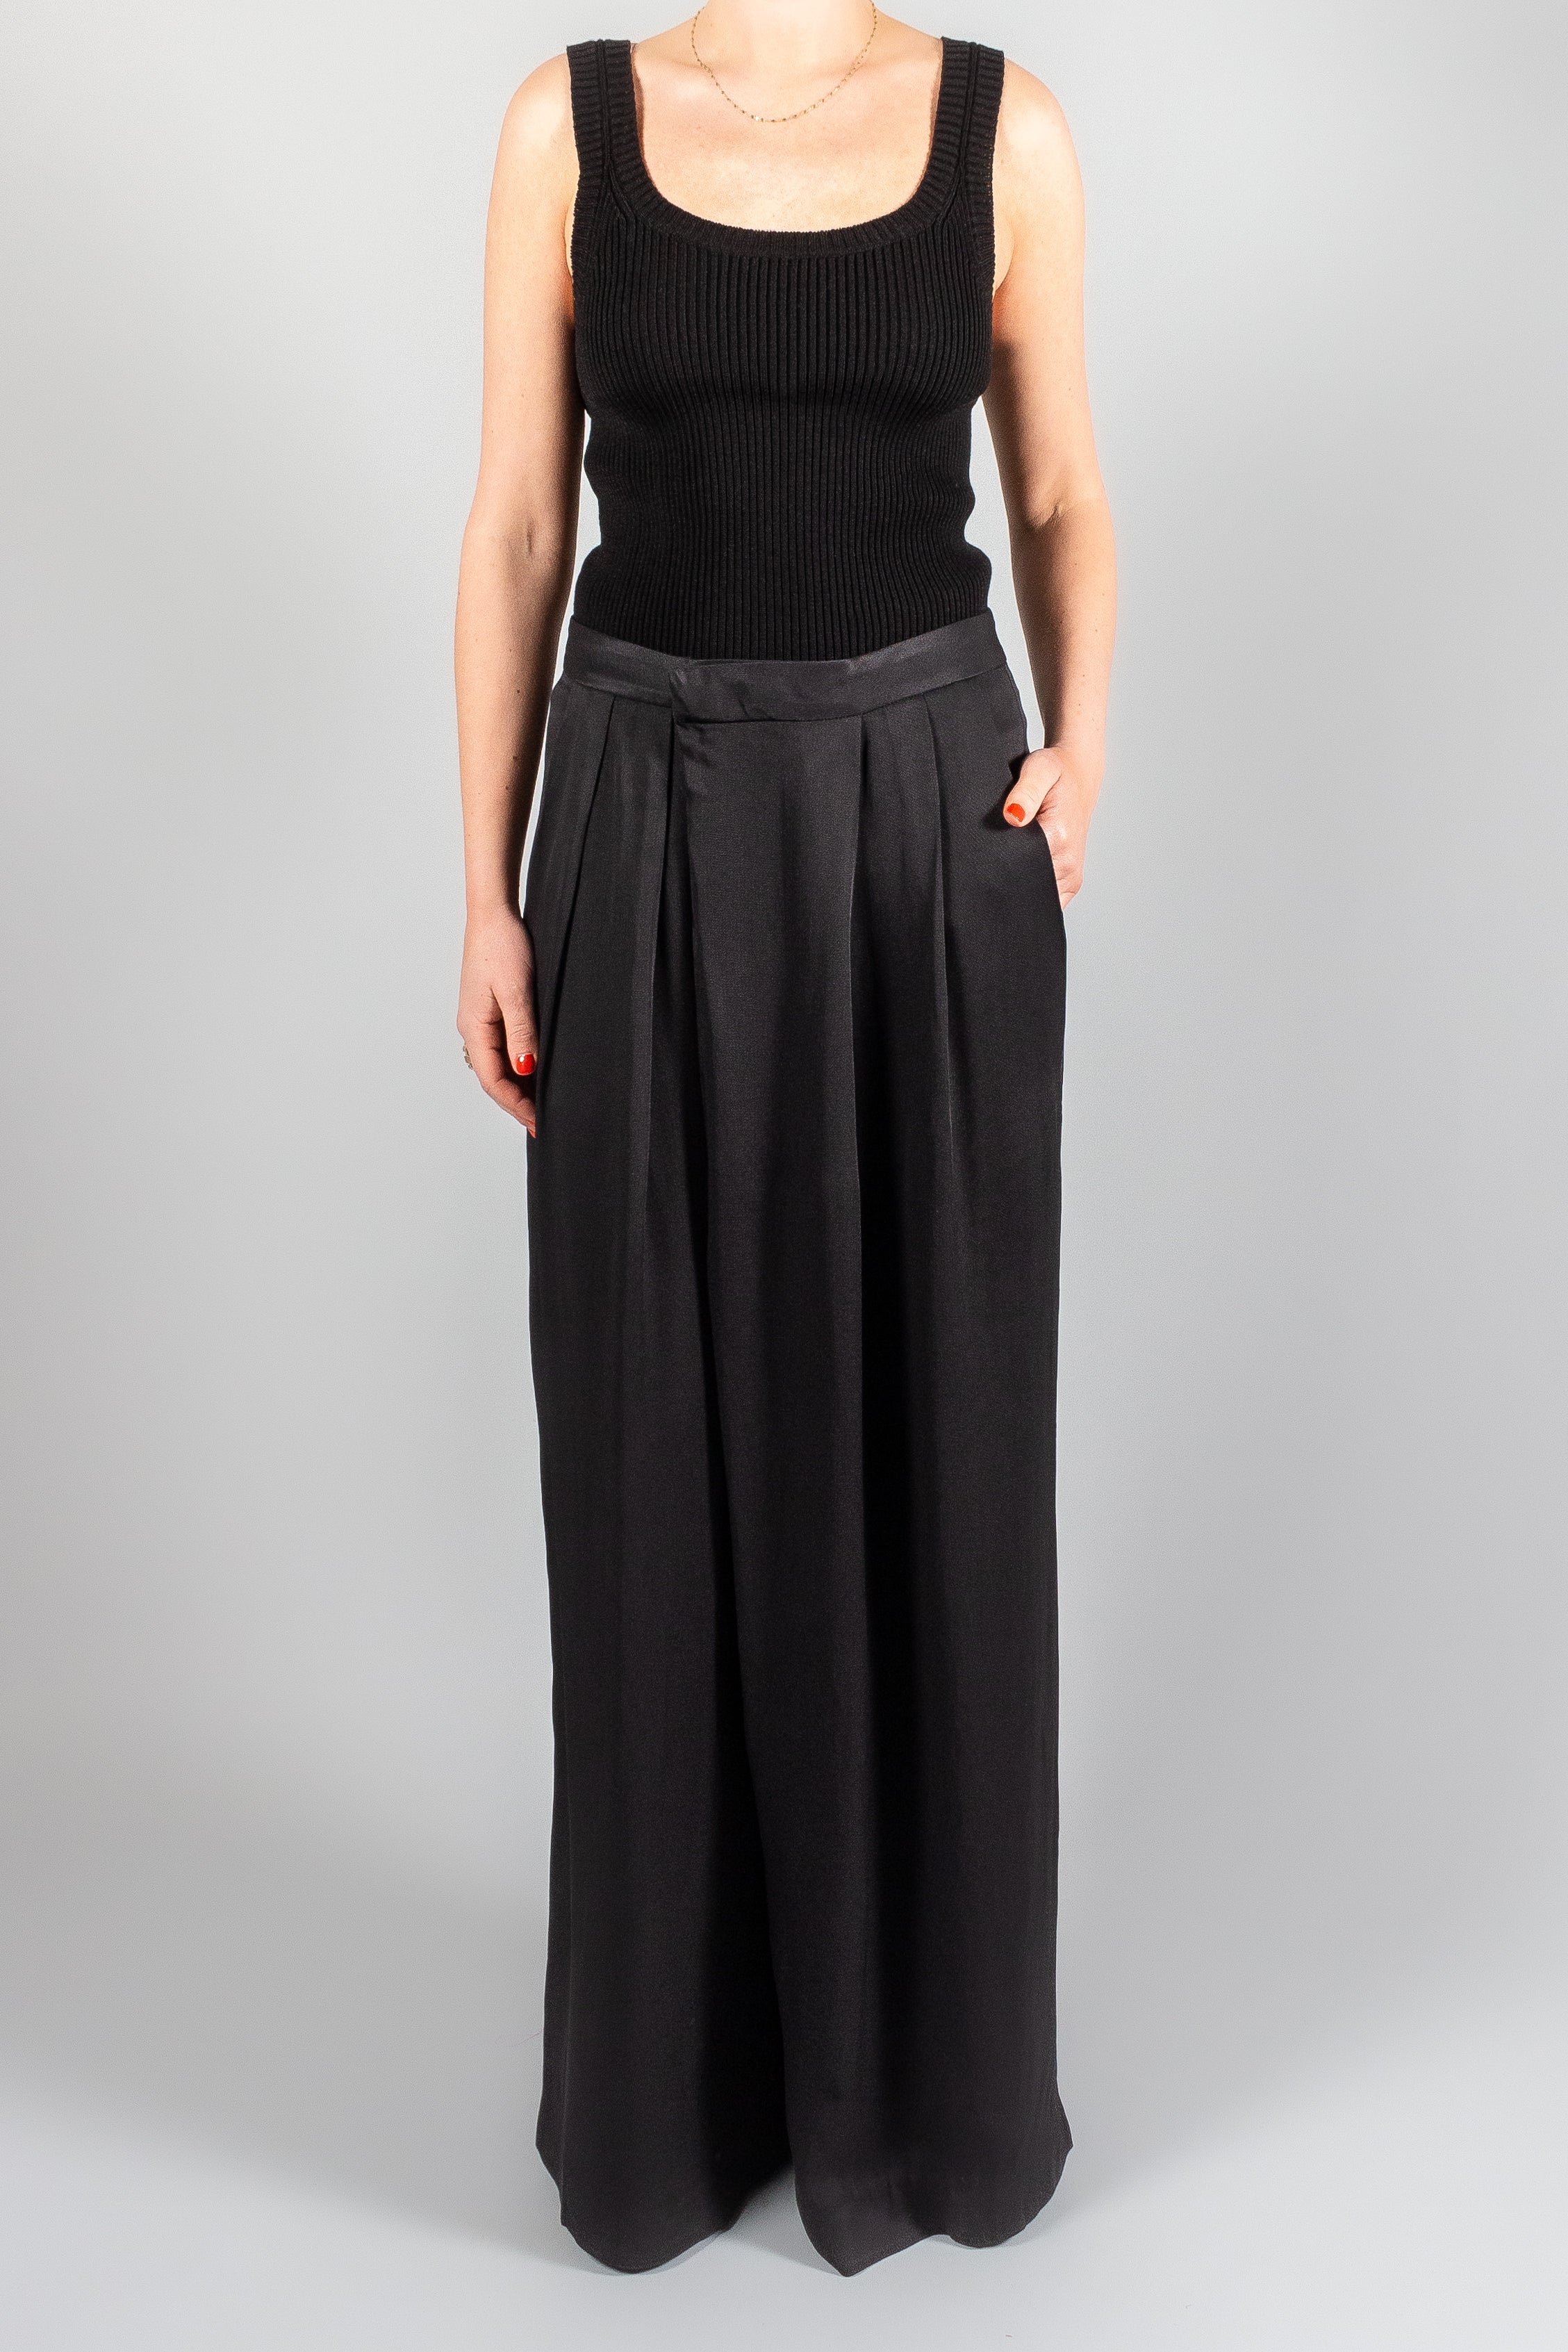 Closed Zola Crossover Pant--Misch-Vancouver-Canada